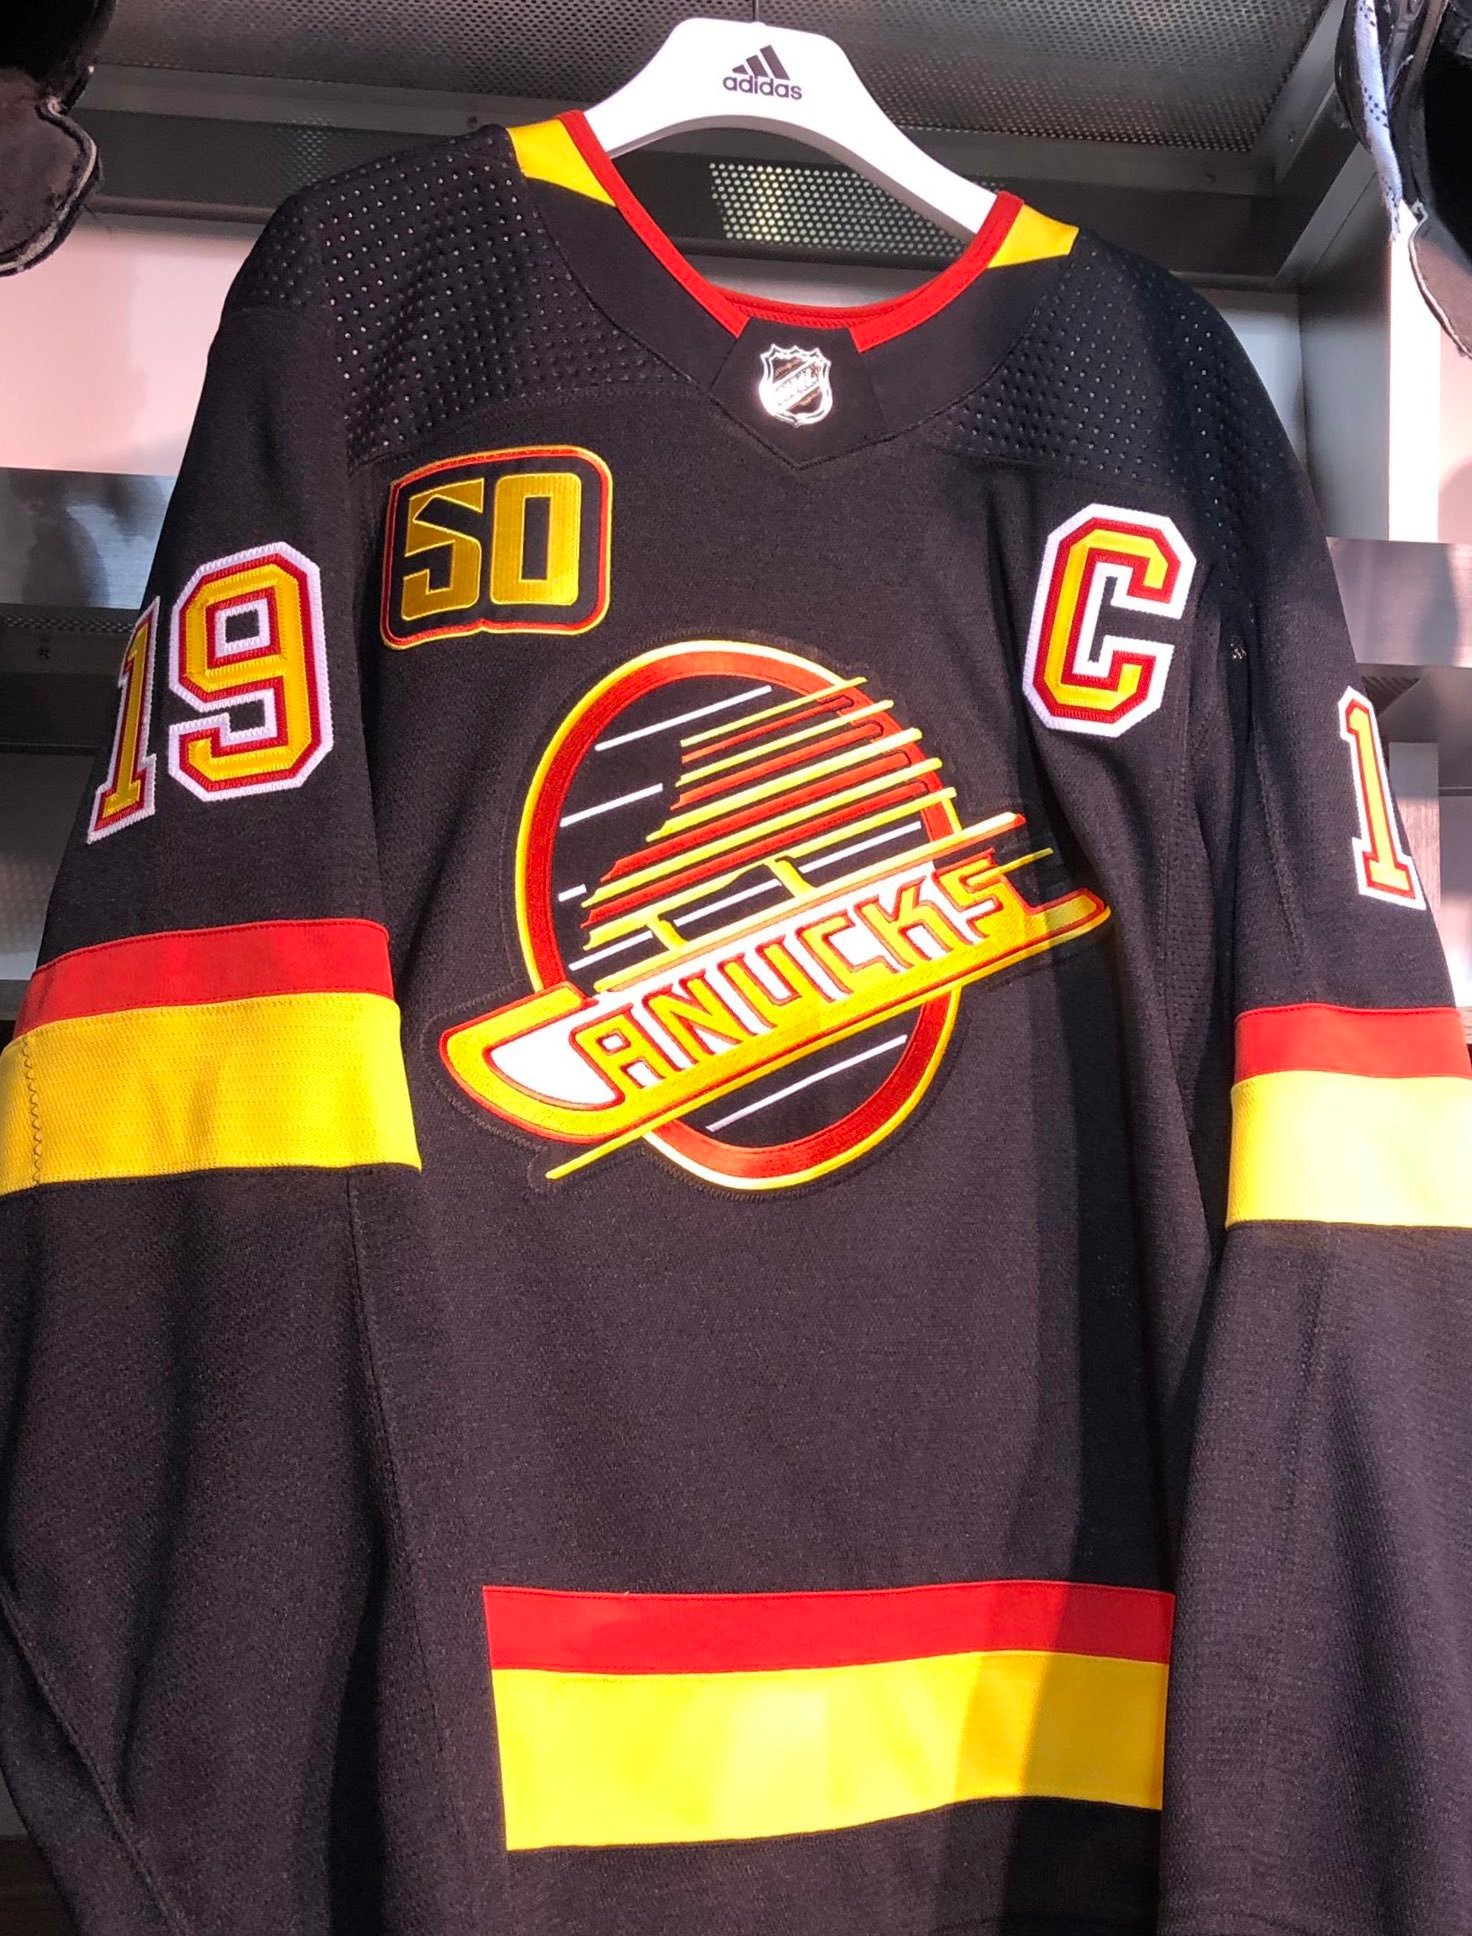 The Vancouver Canucks are bringing back their Black Skate jerseys